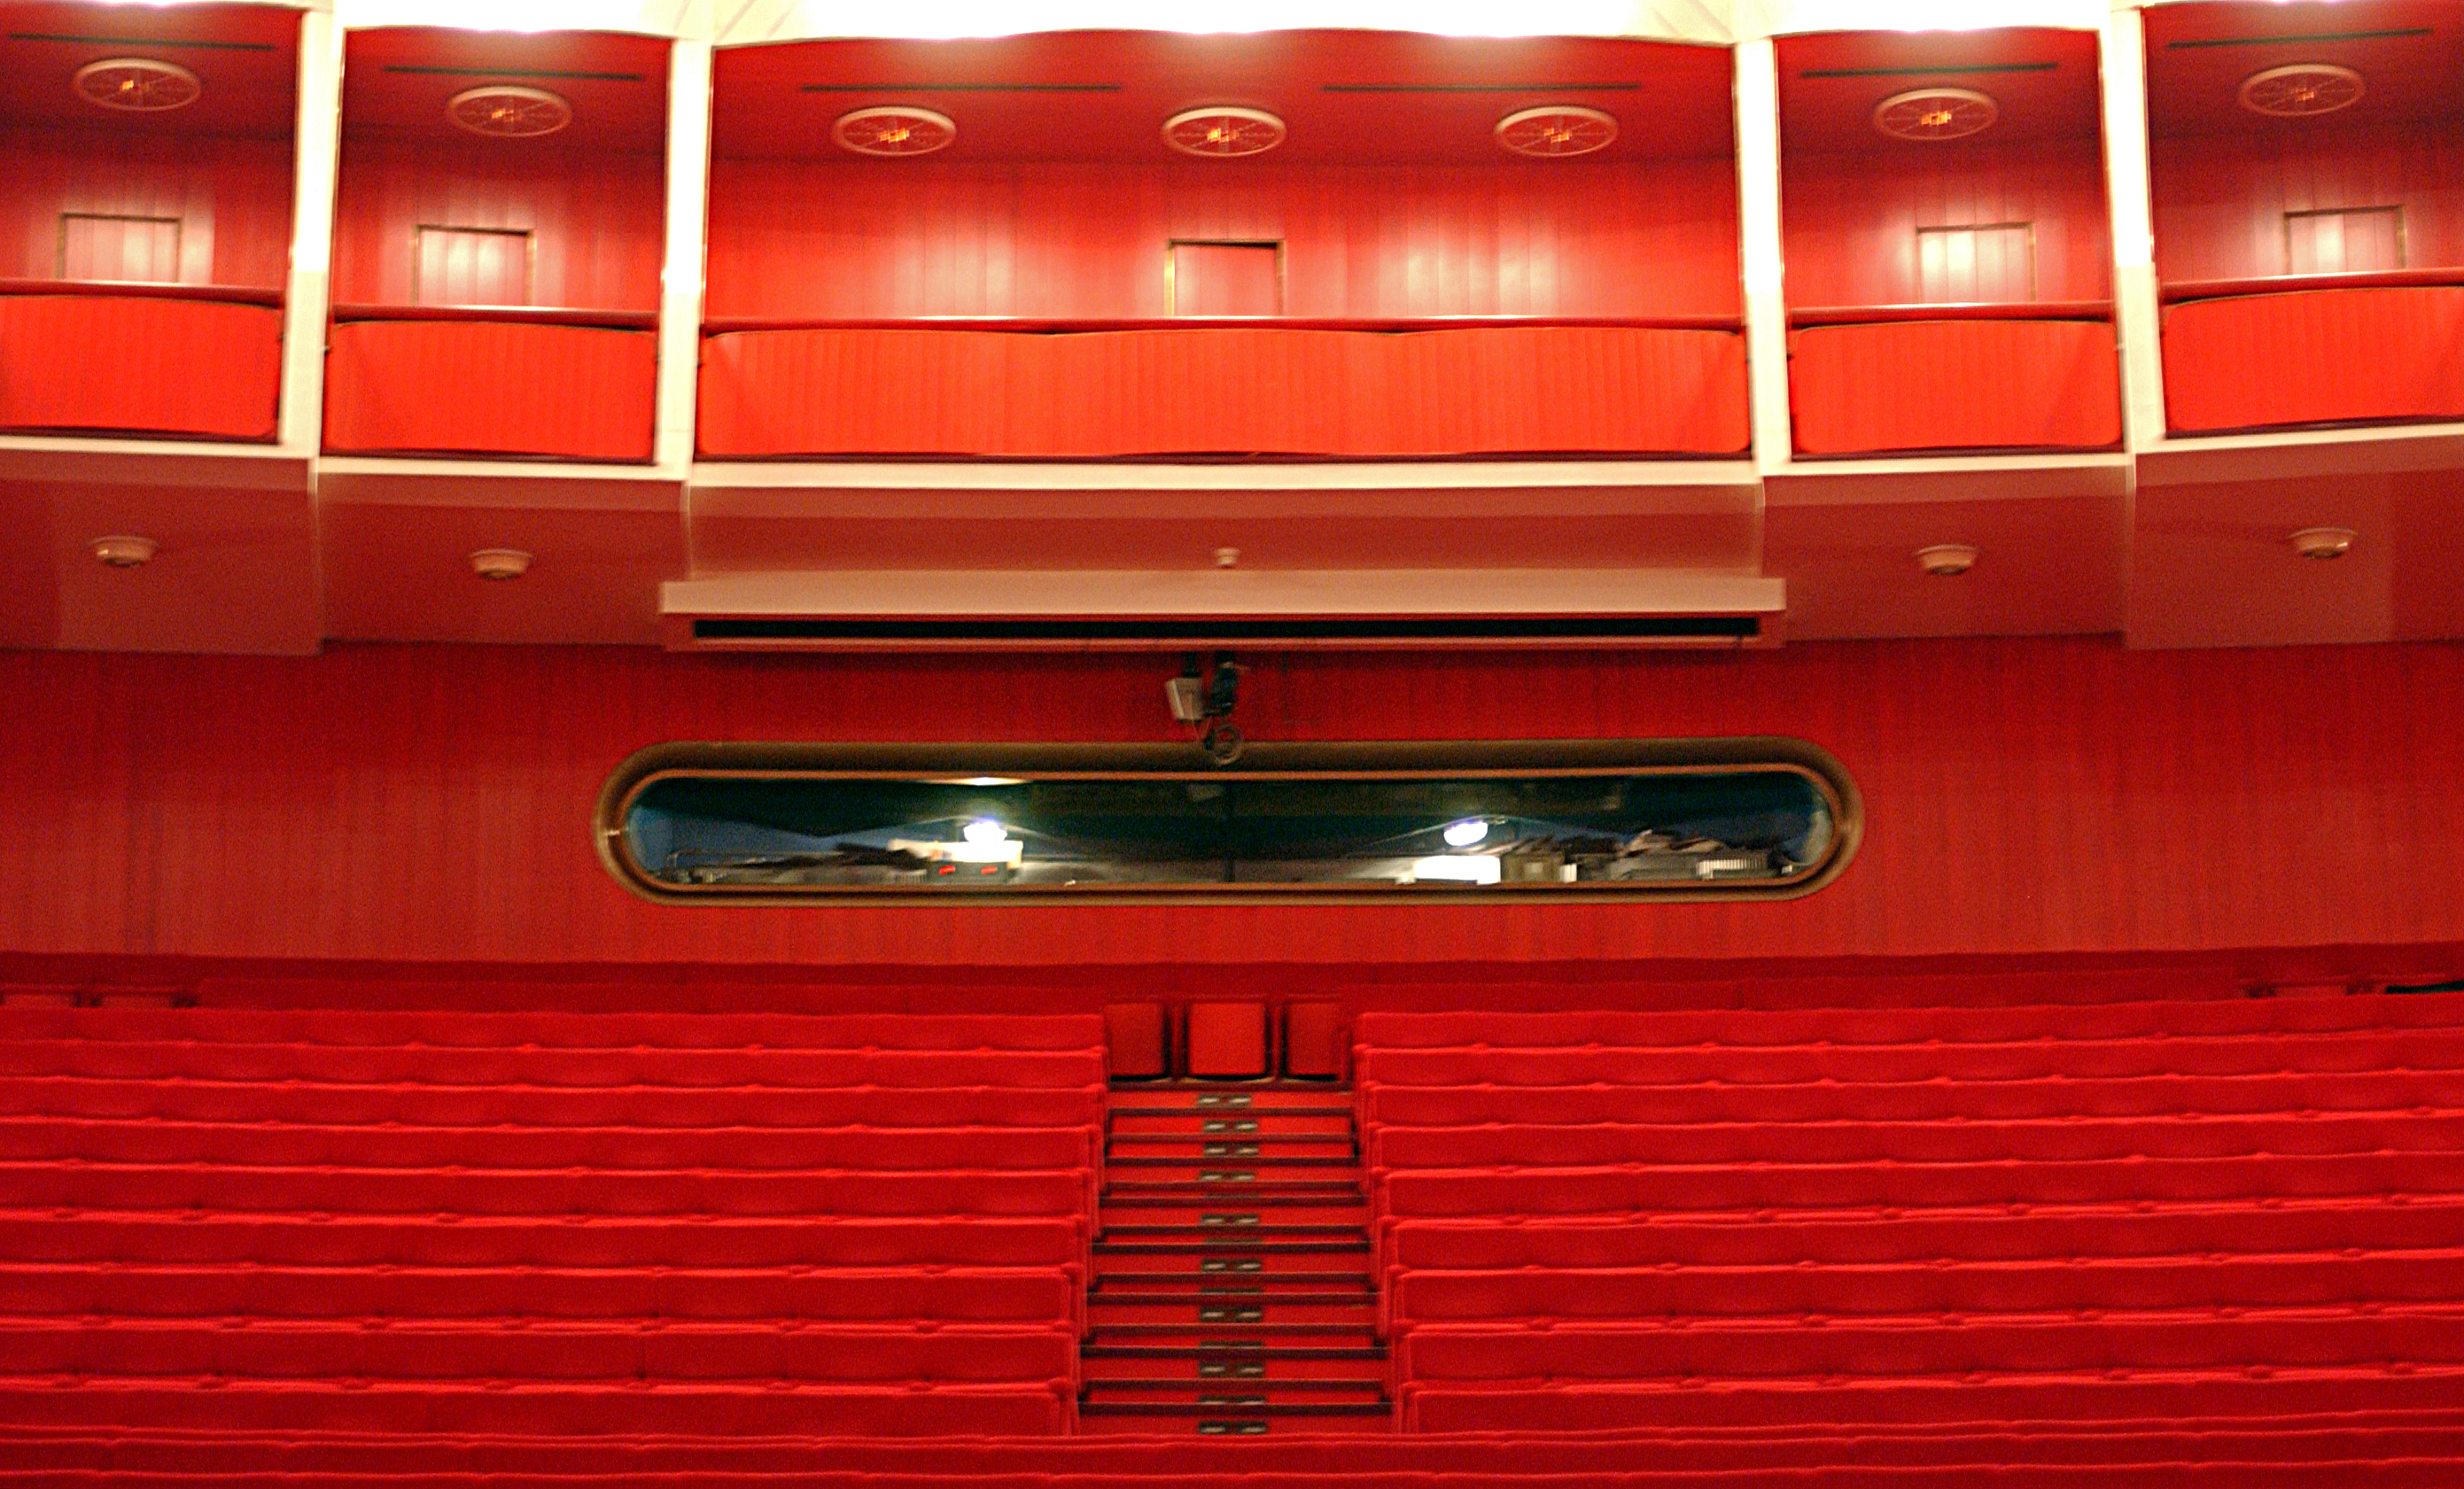 The oblong window of the lighting control booth seen from the auditorium